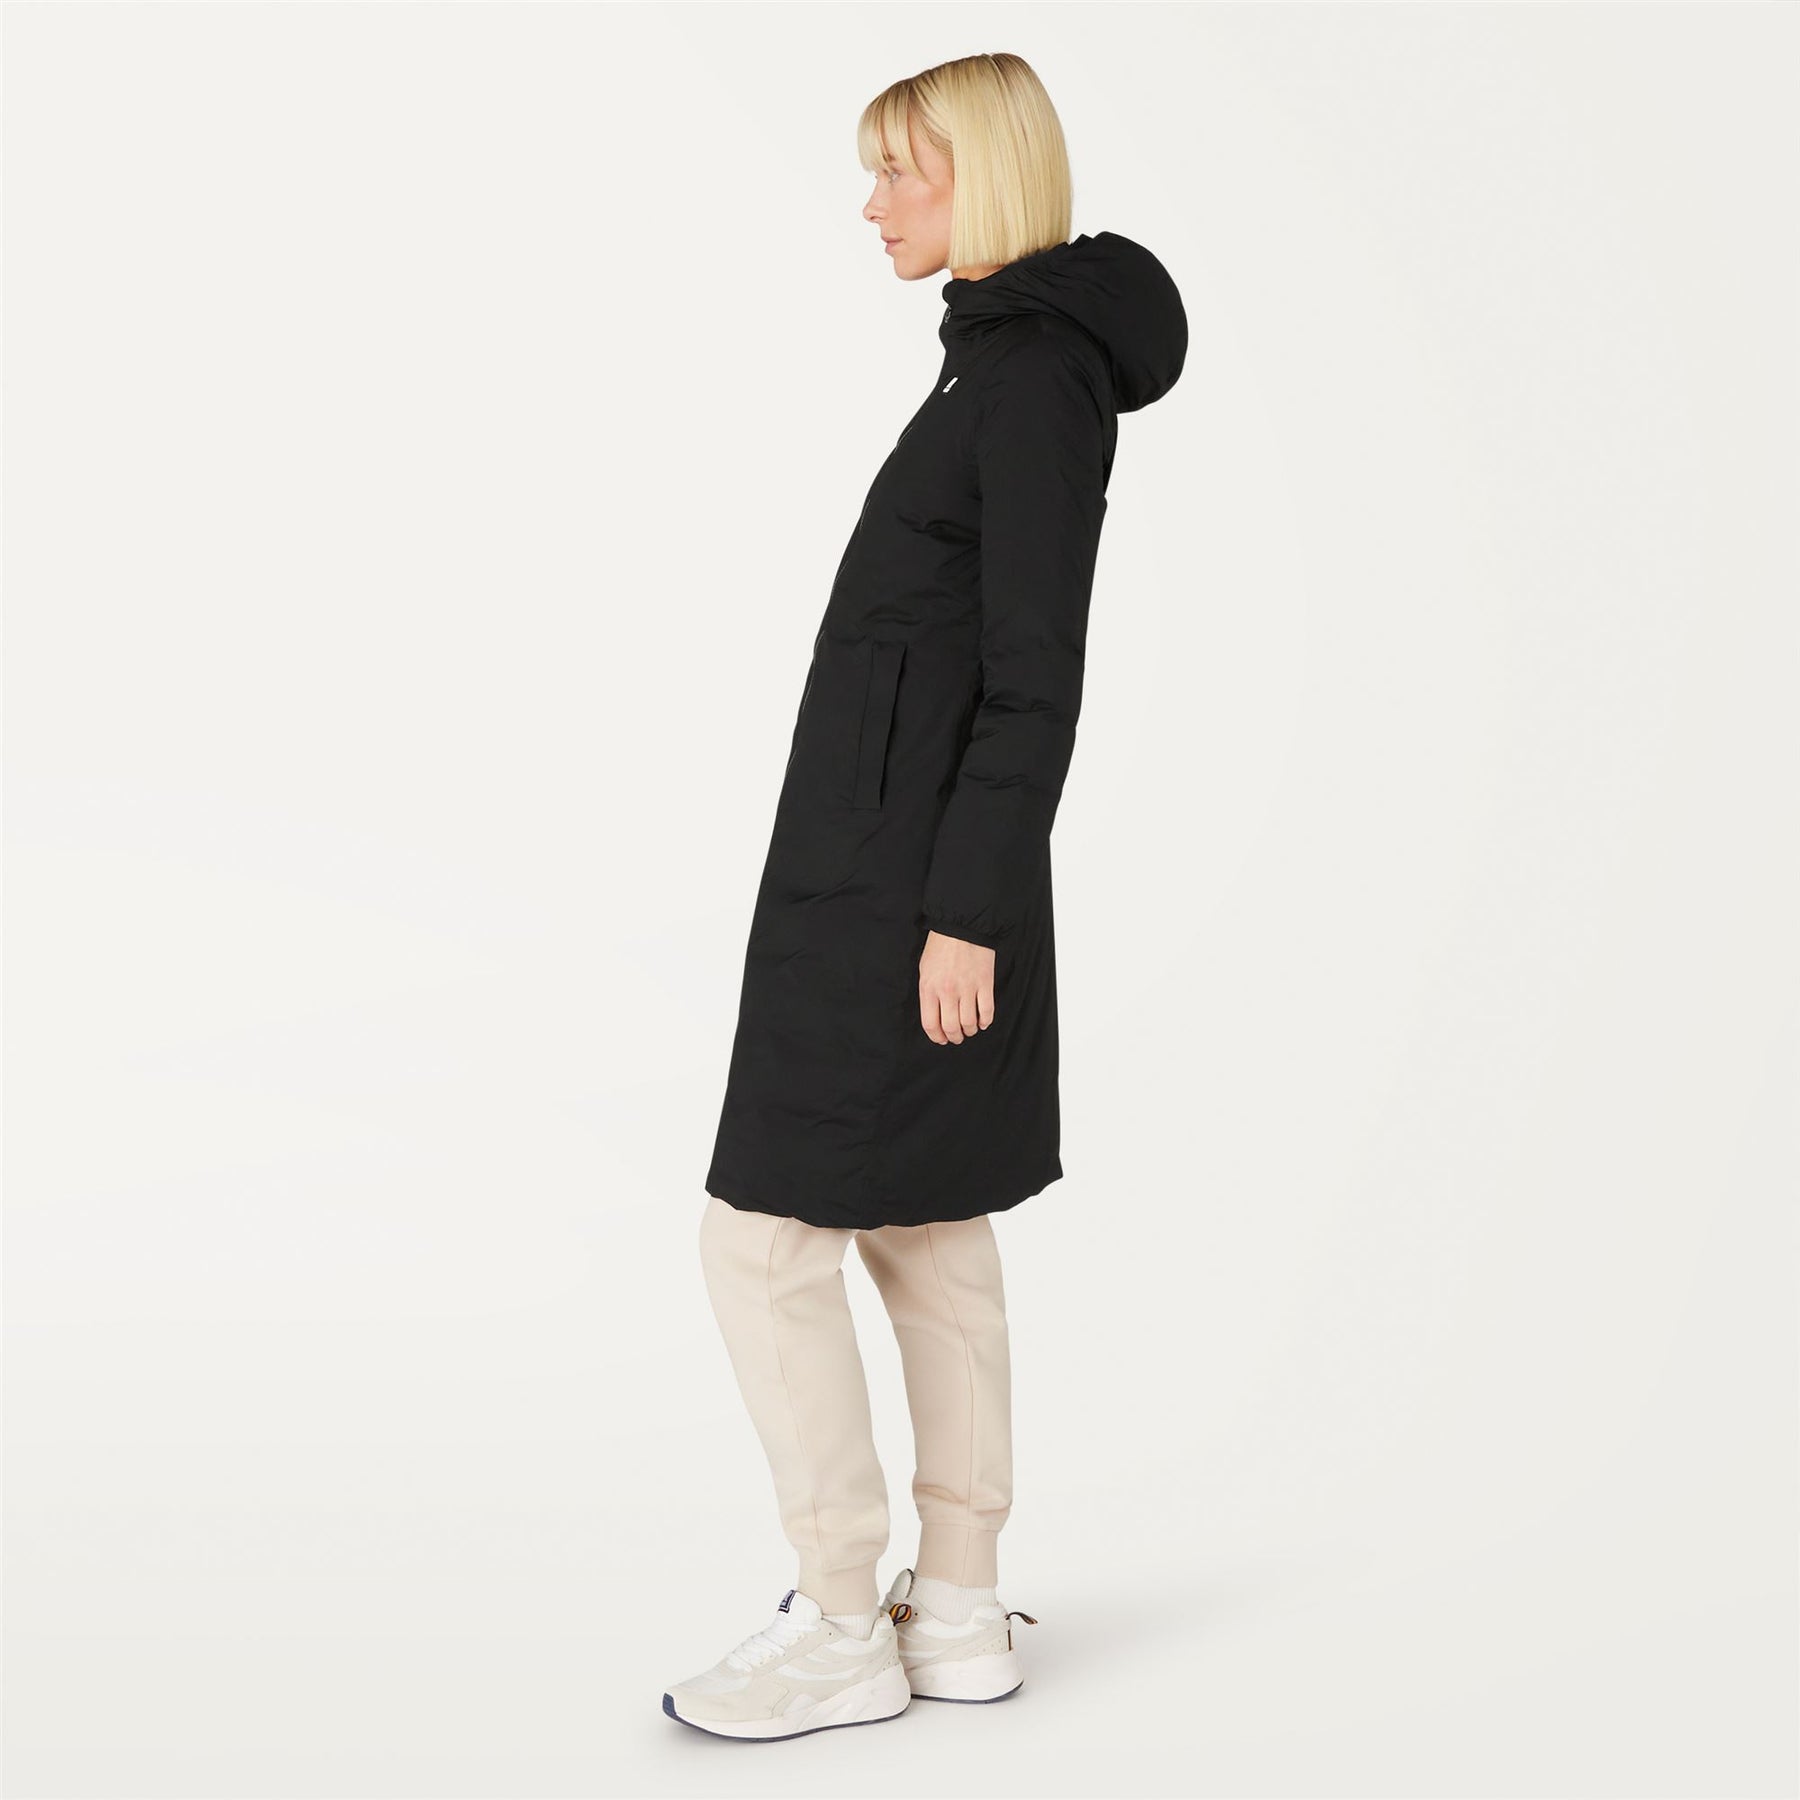 Suzanne Thermo Stretch - Women Hooded Waterproof Coat in Black Pure